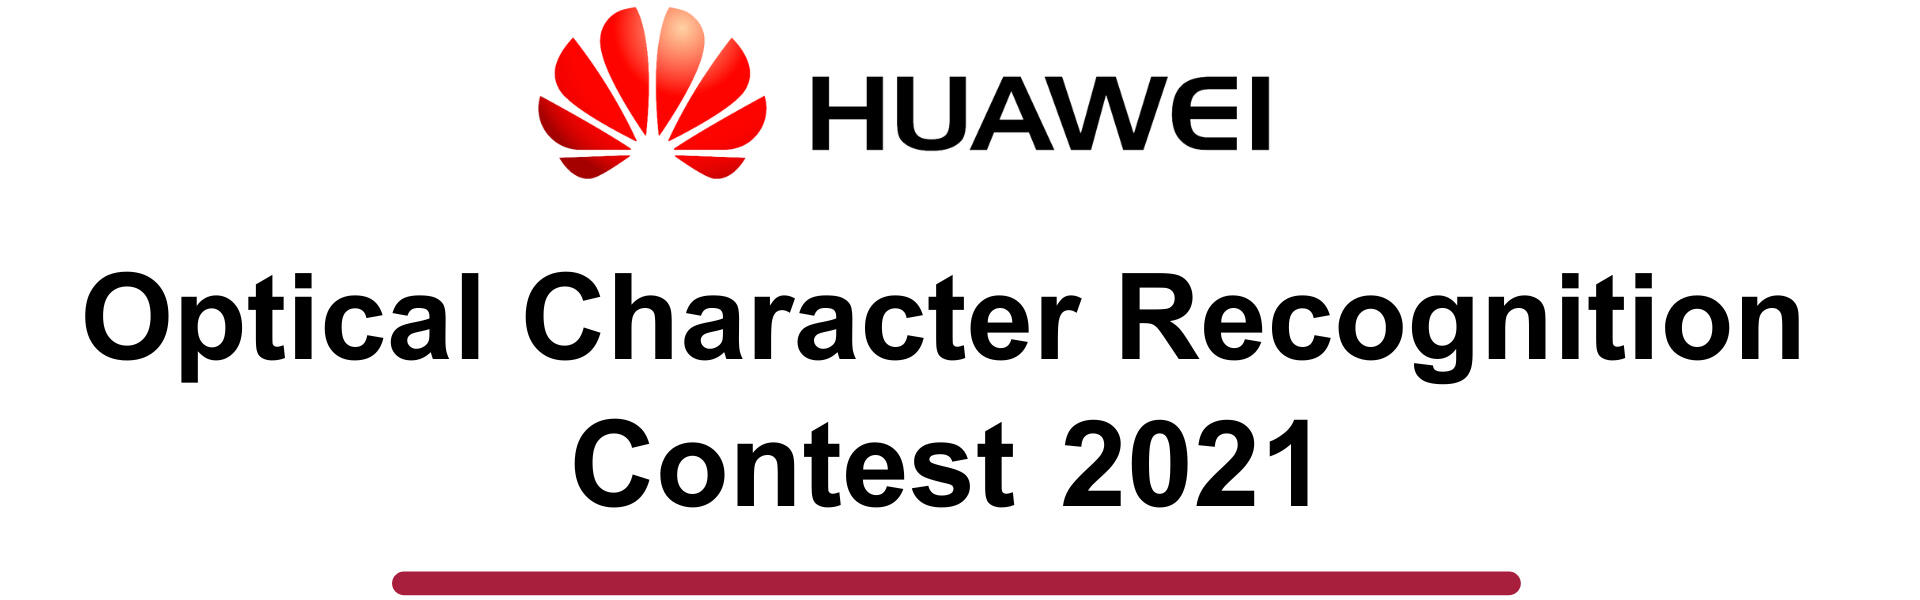 1st Place, Huawei OCR contest, Jan 2022